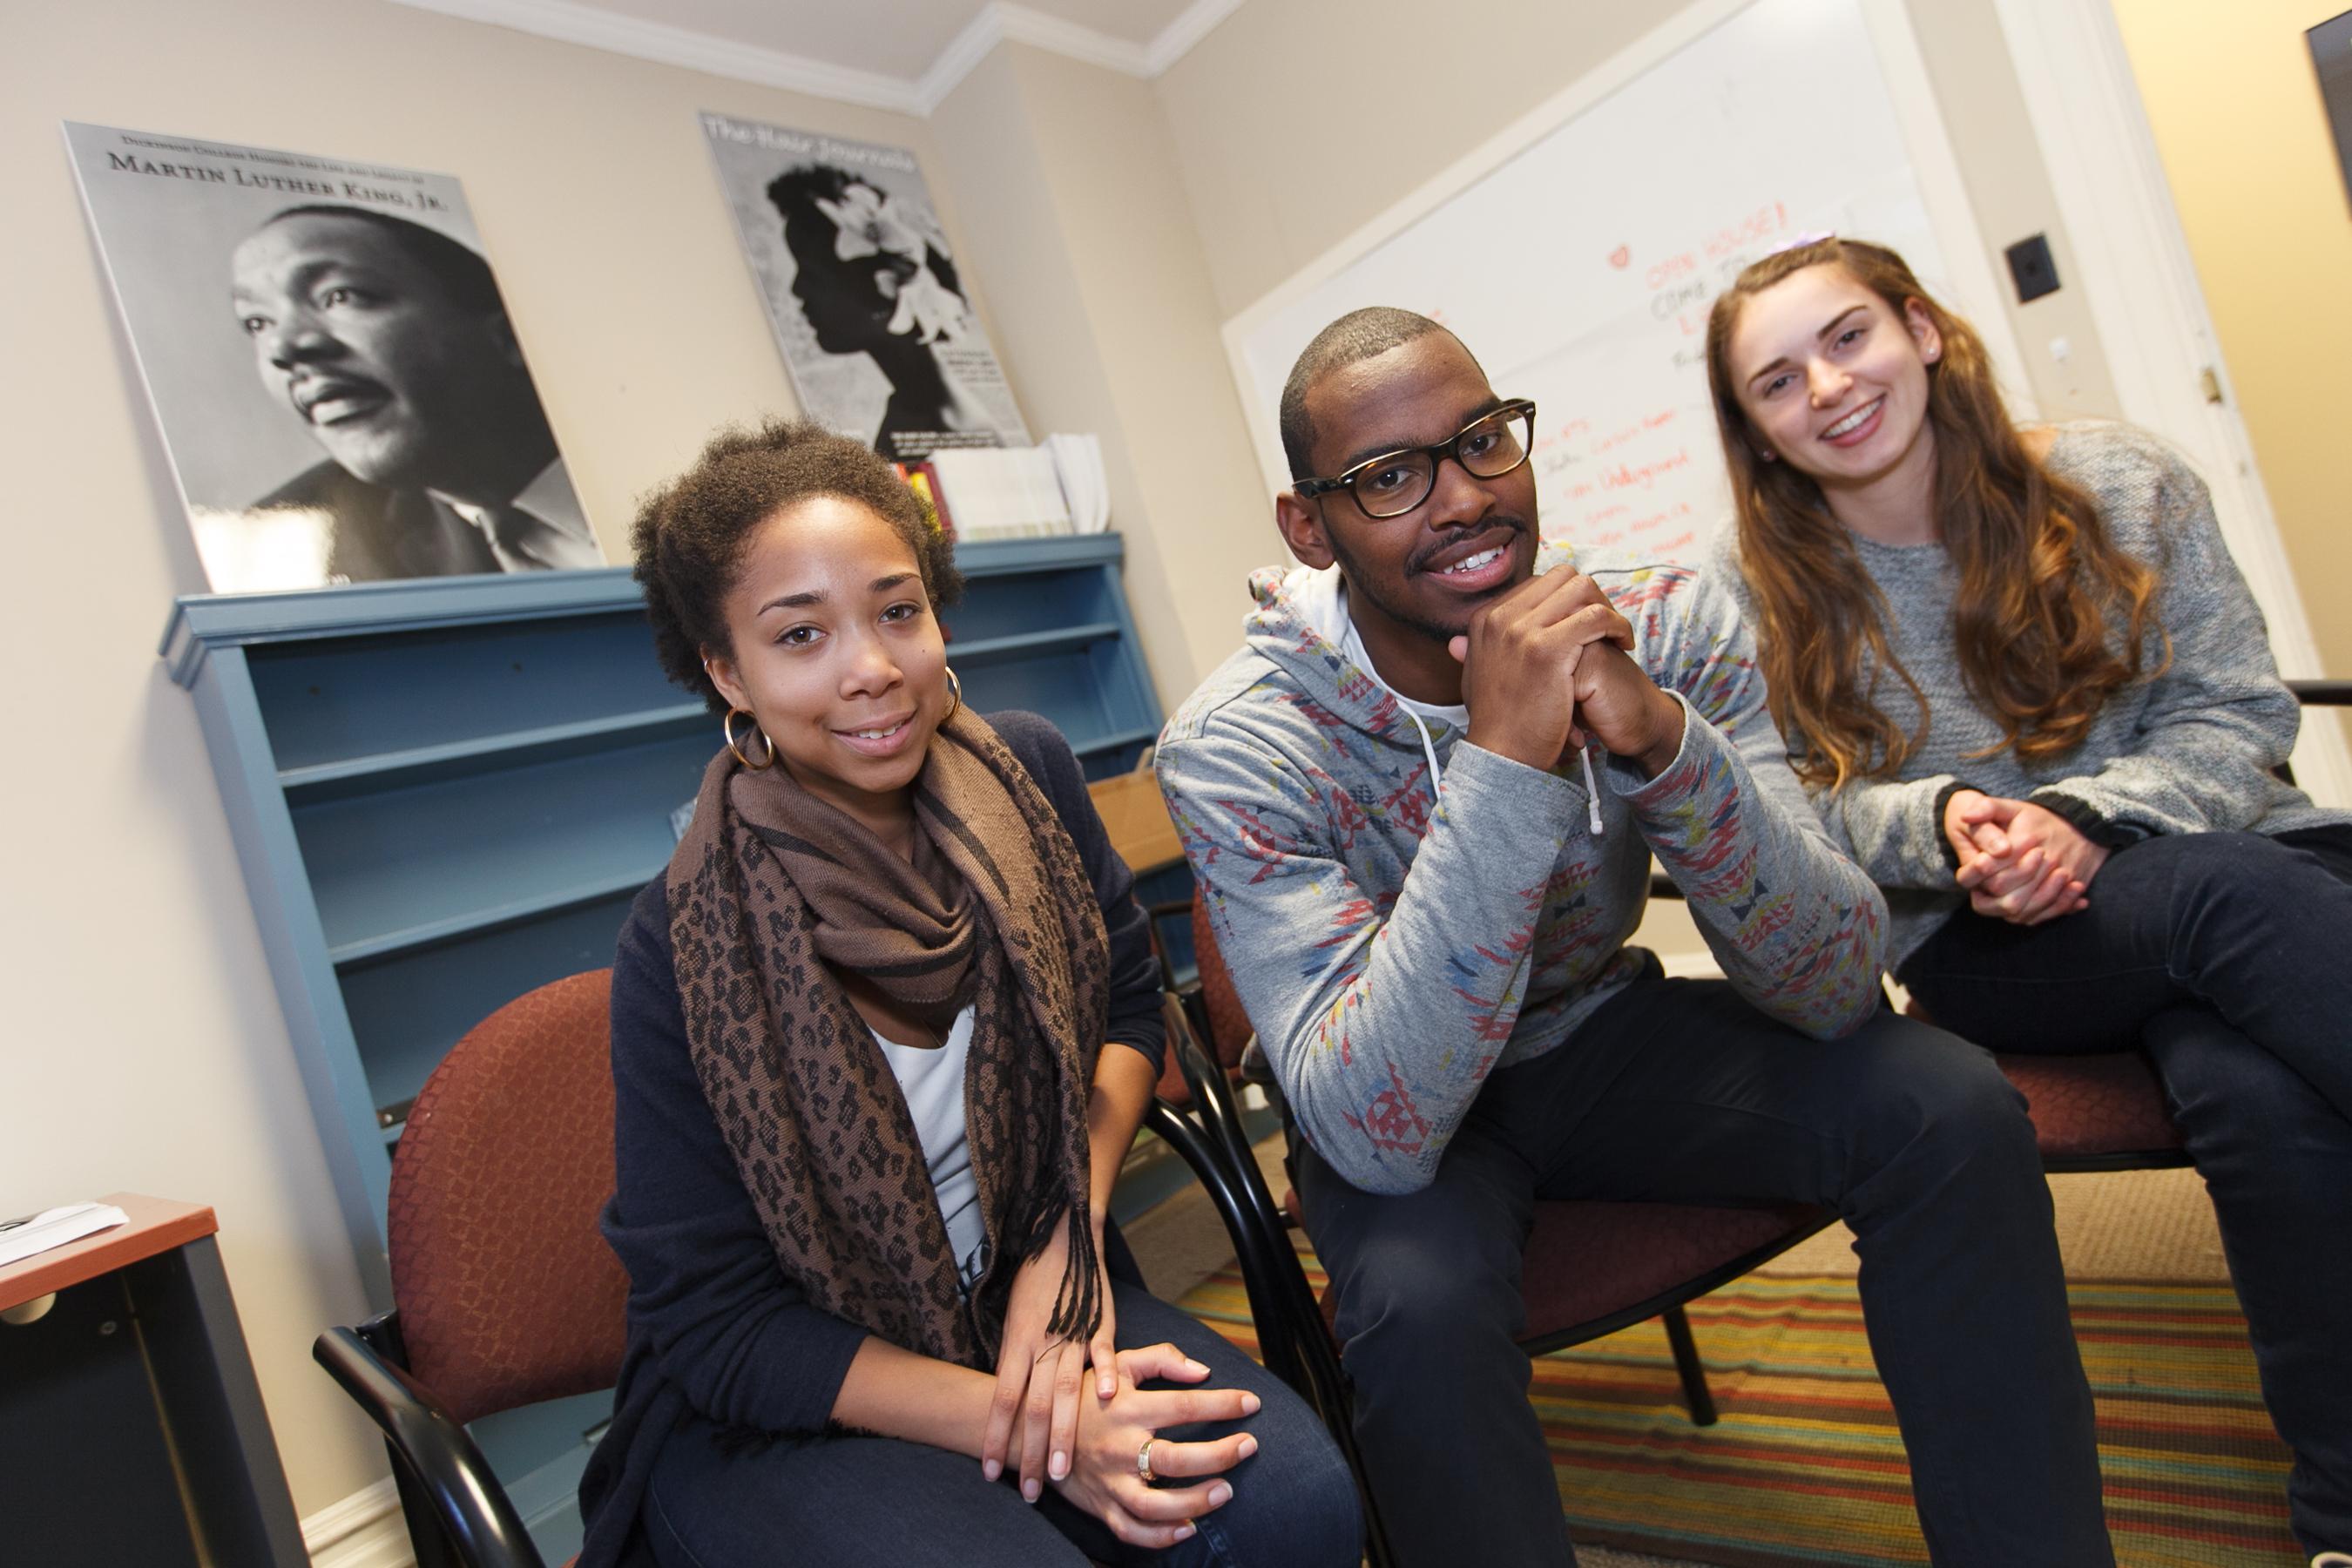 Students navigate the popel shaw center through uncertain times.